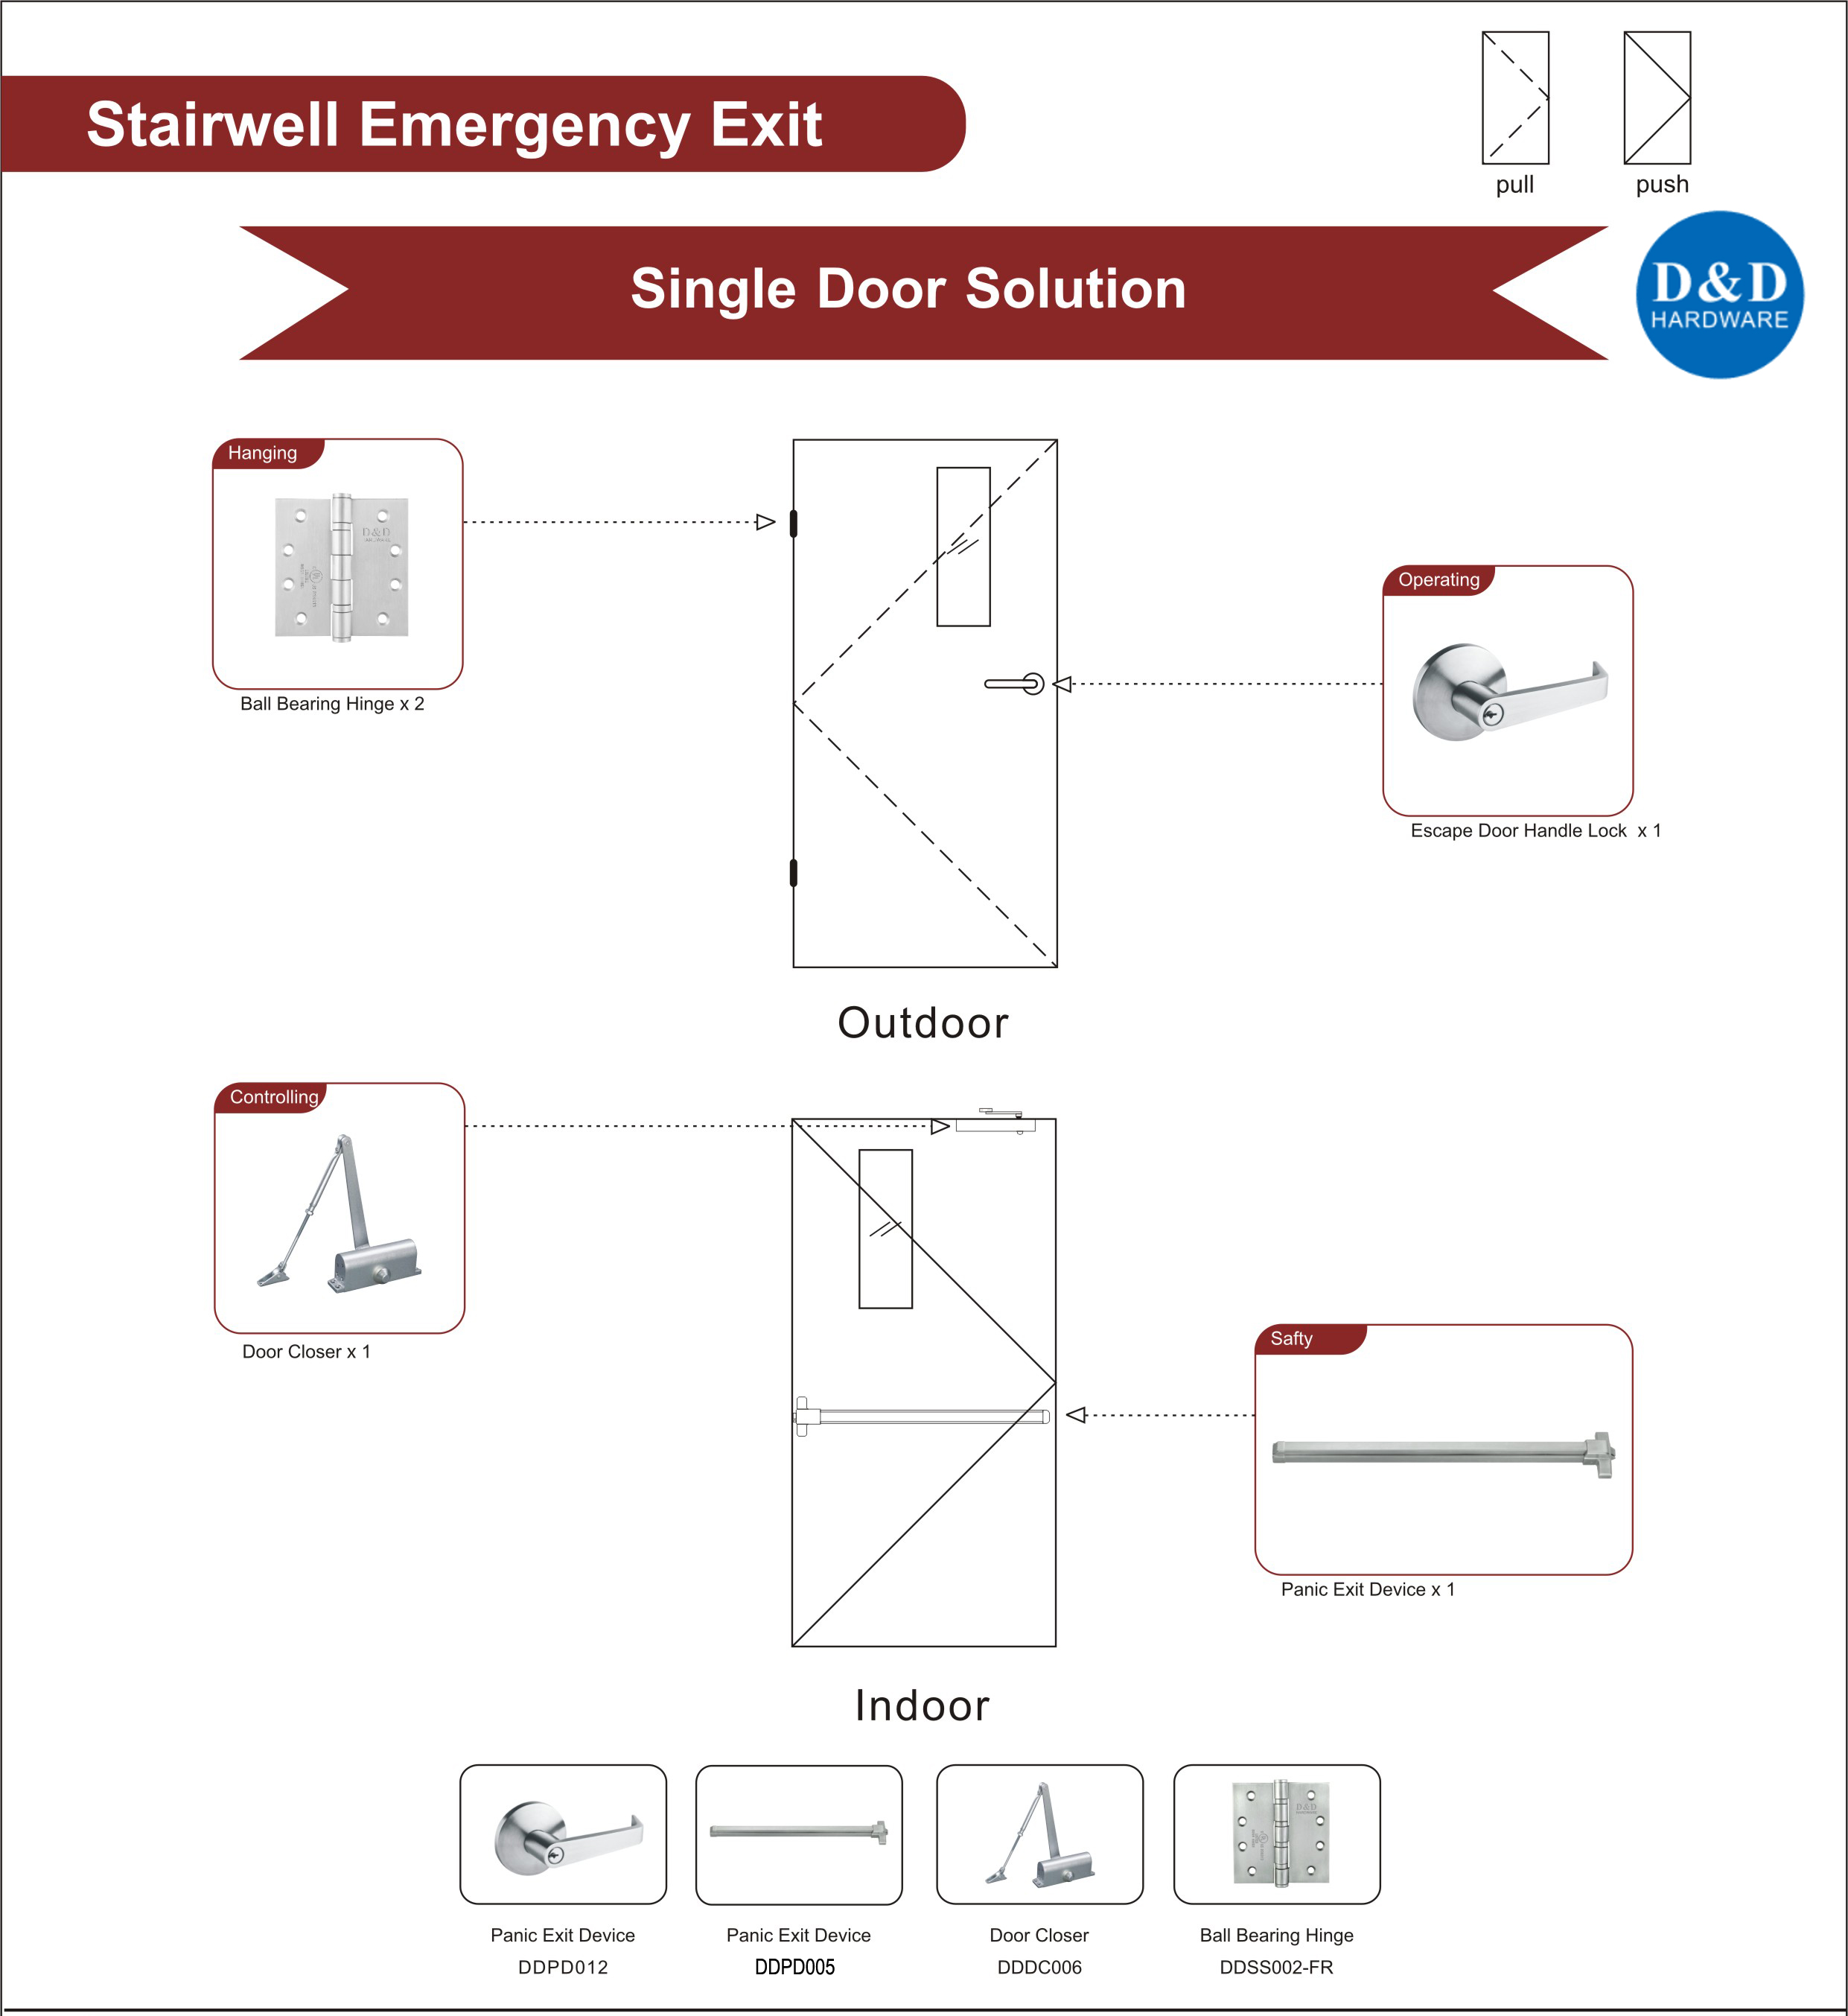 Fire Rate Door Hardware for Stairwell Emergency Exit-D&D Hardware 